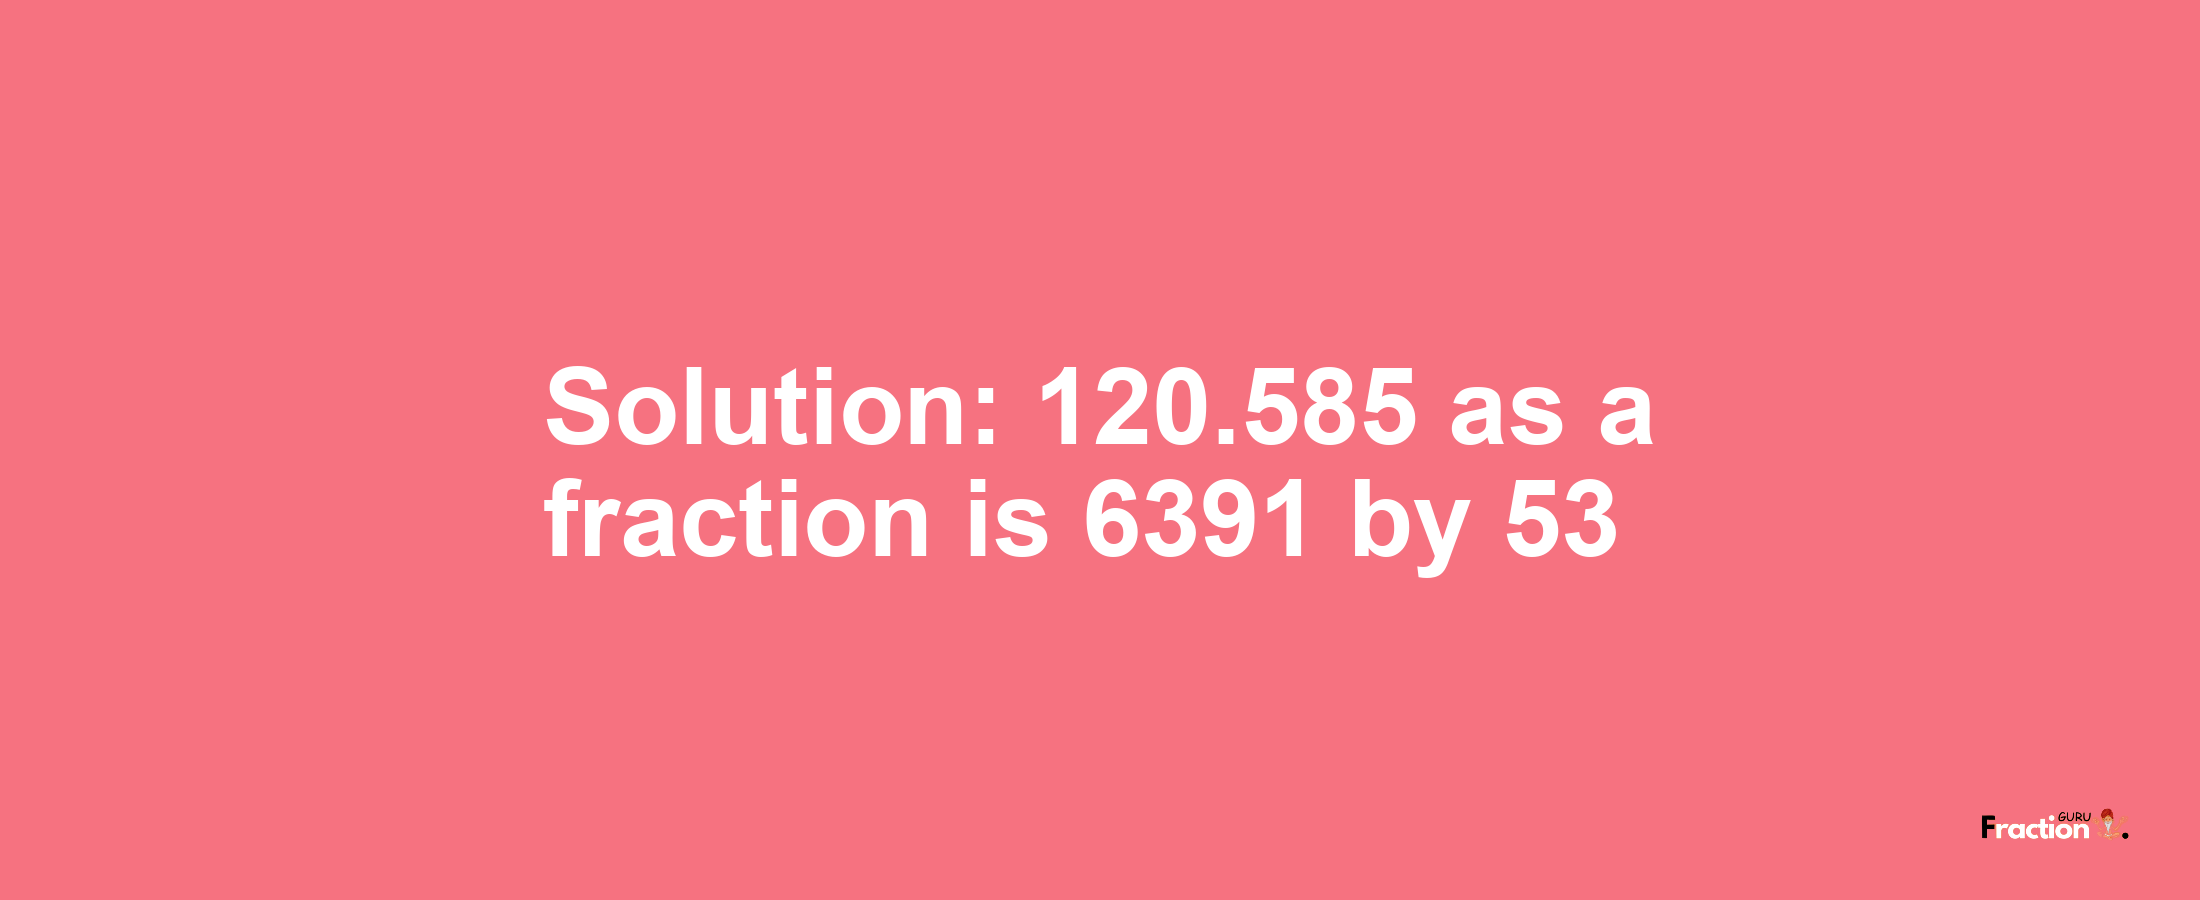 Solution:120.585 as a fraction is 6391/53